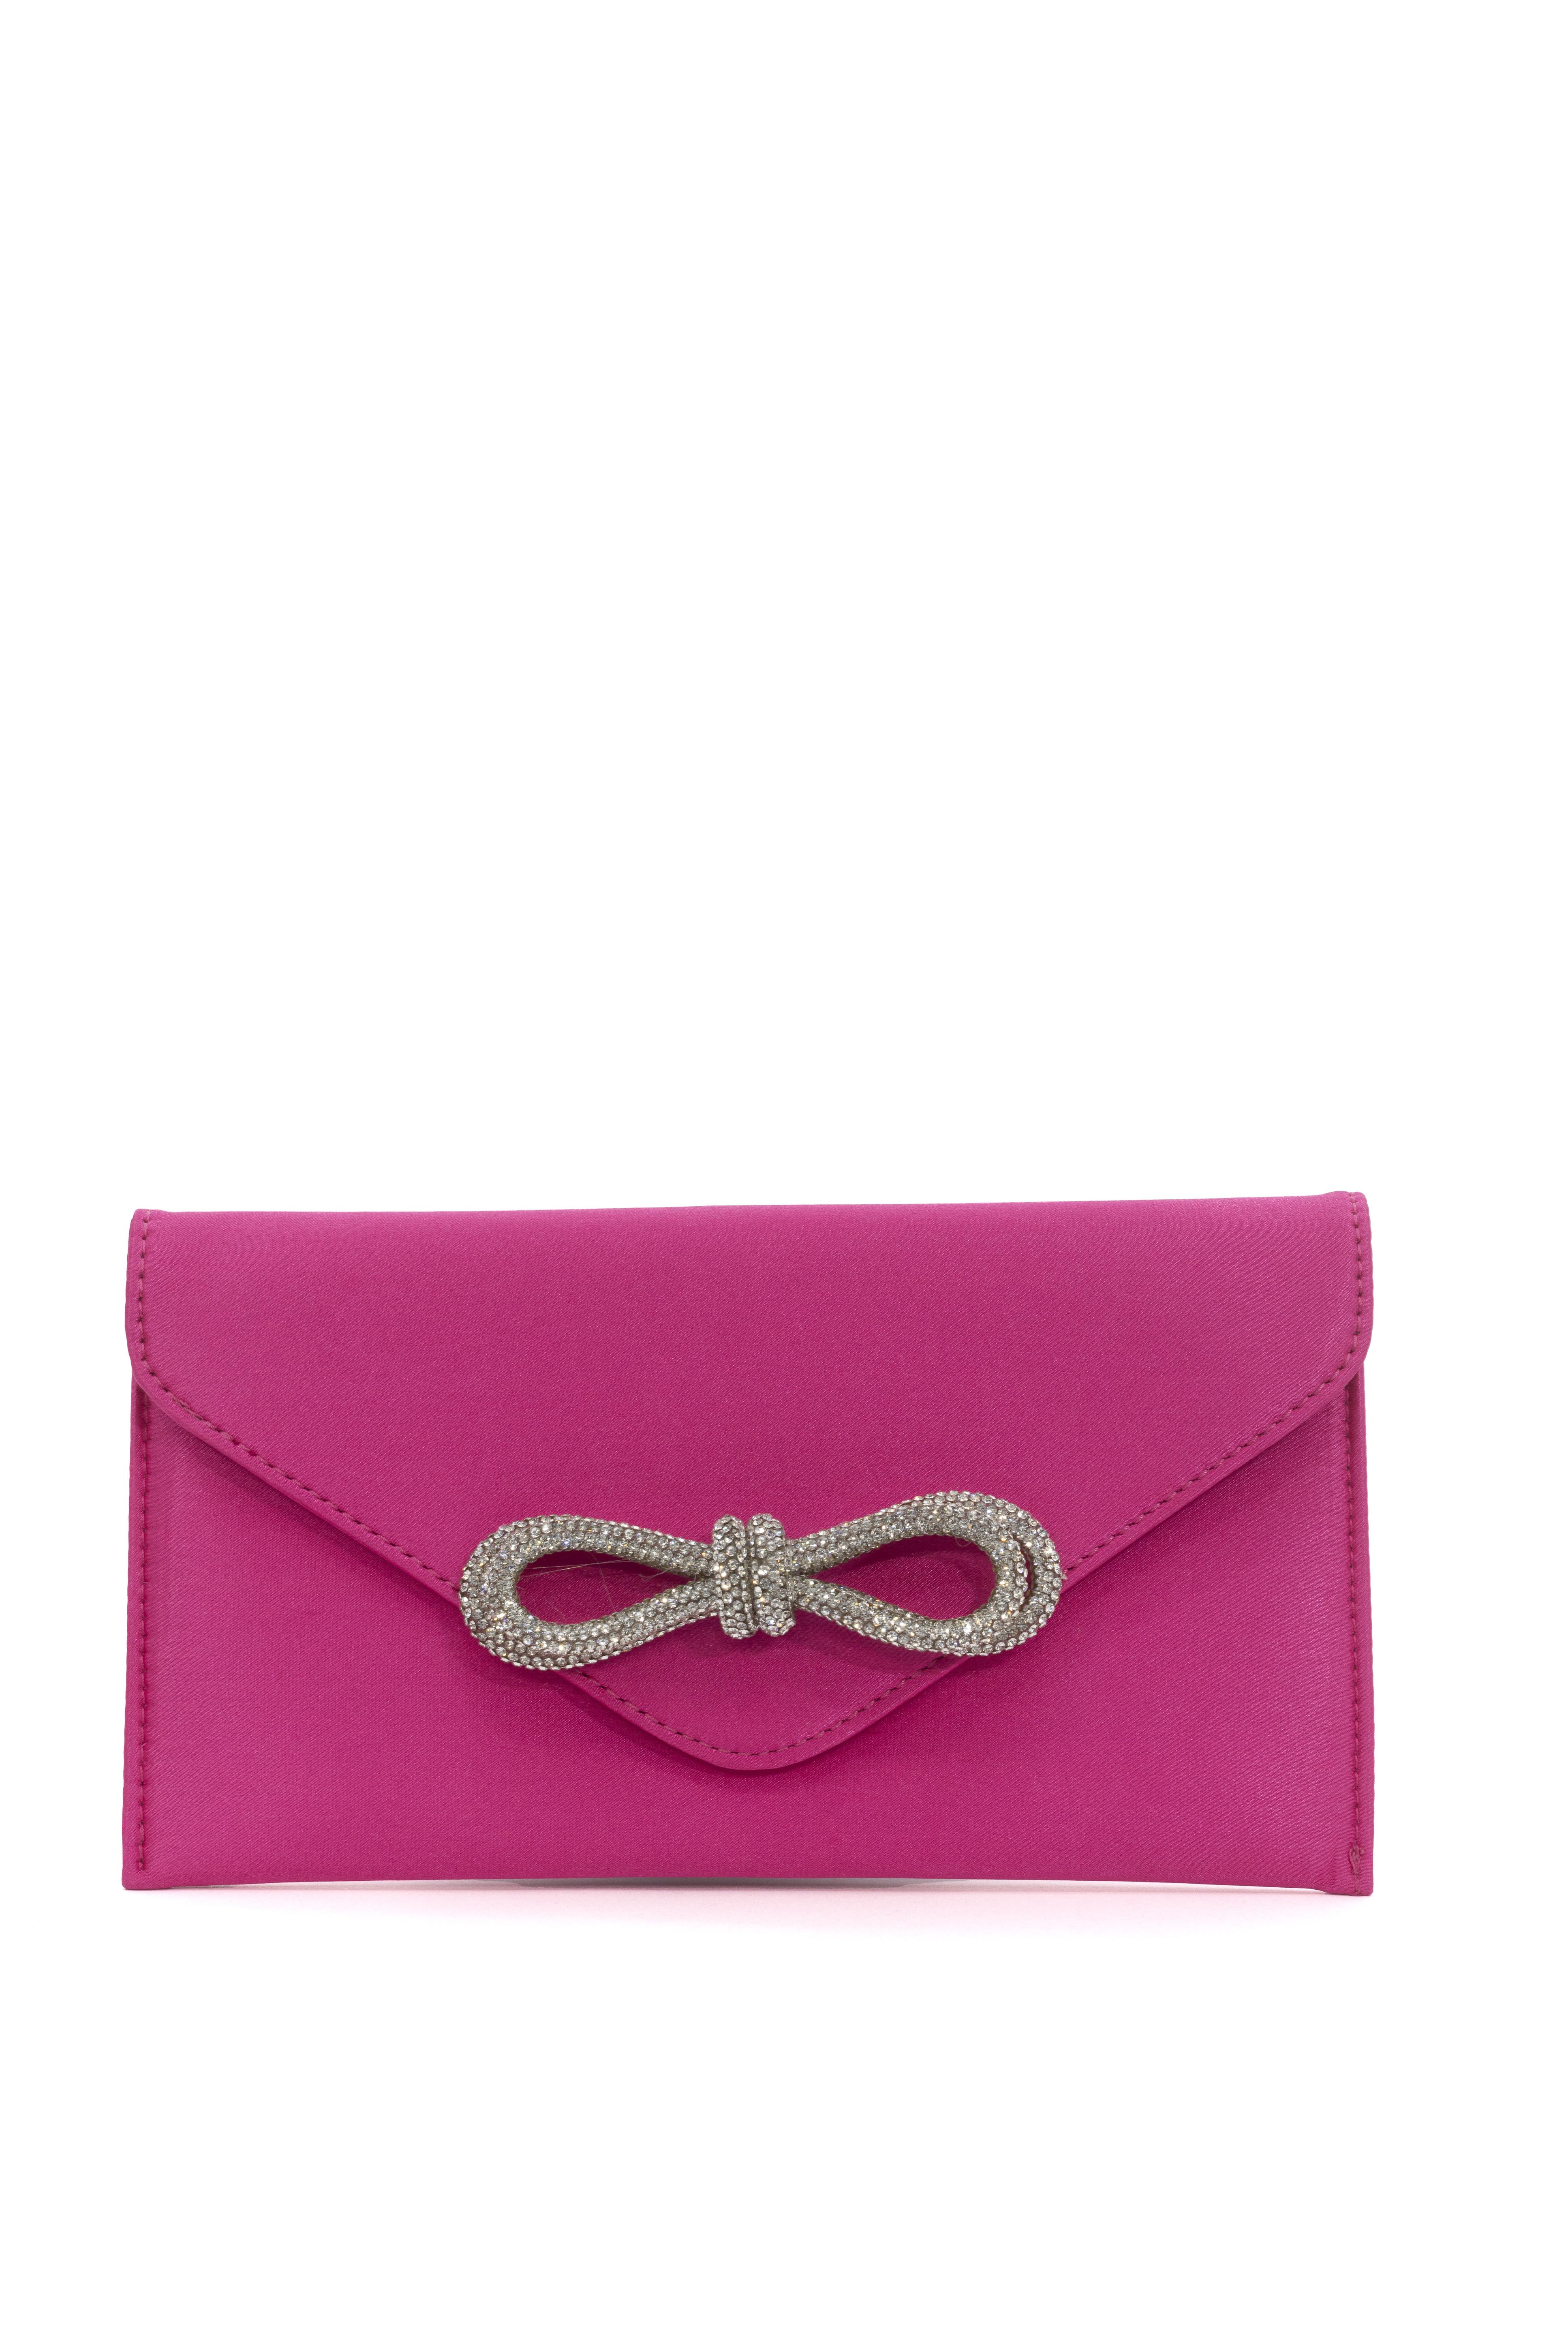 PINK BOW CLUTCH